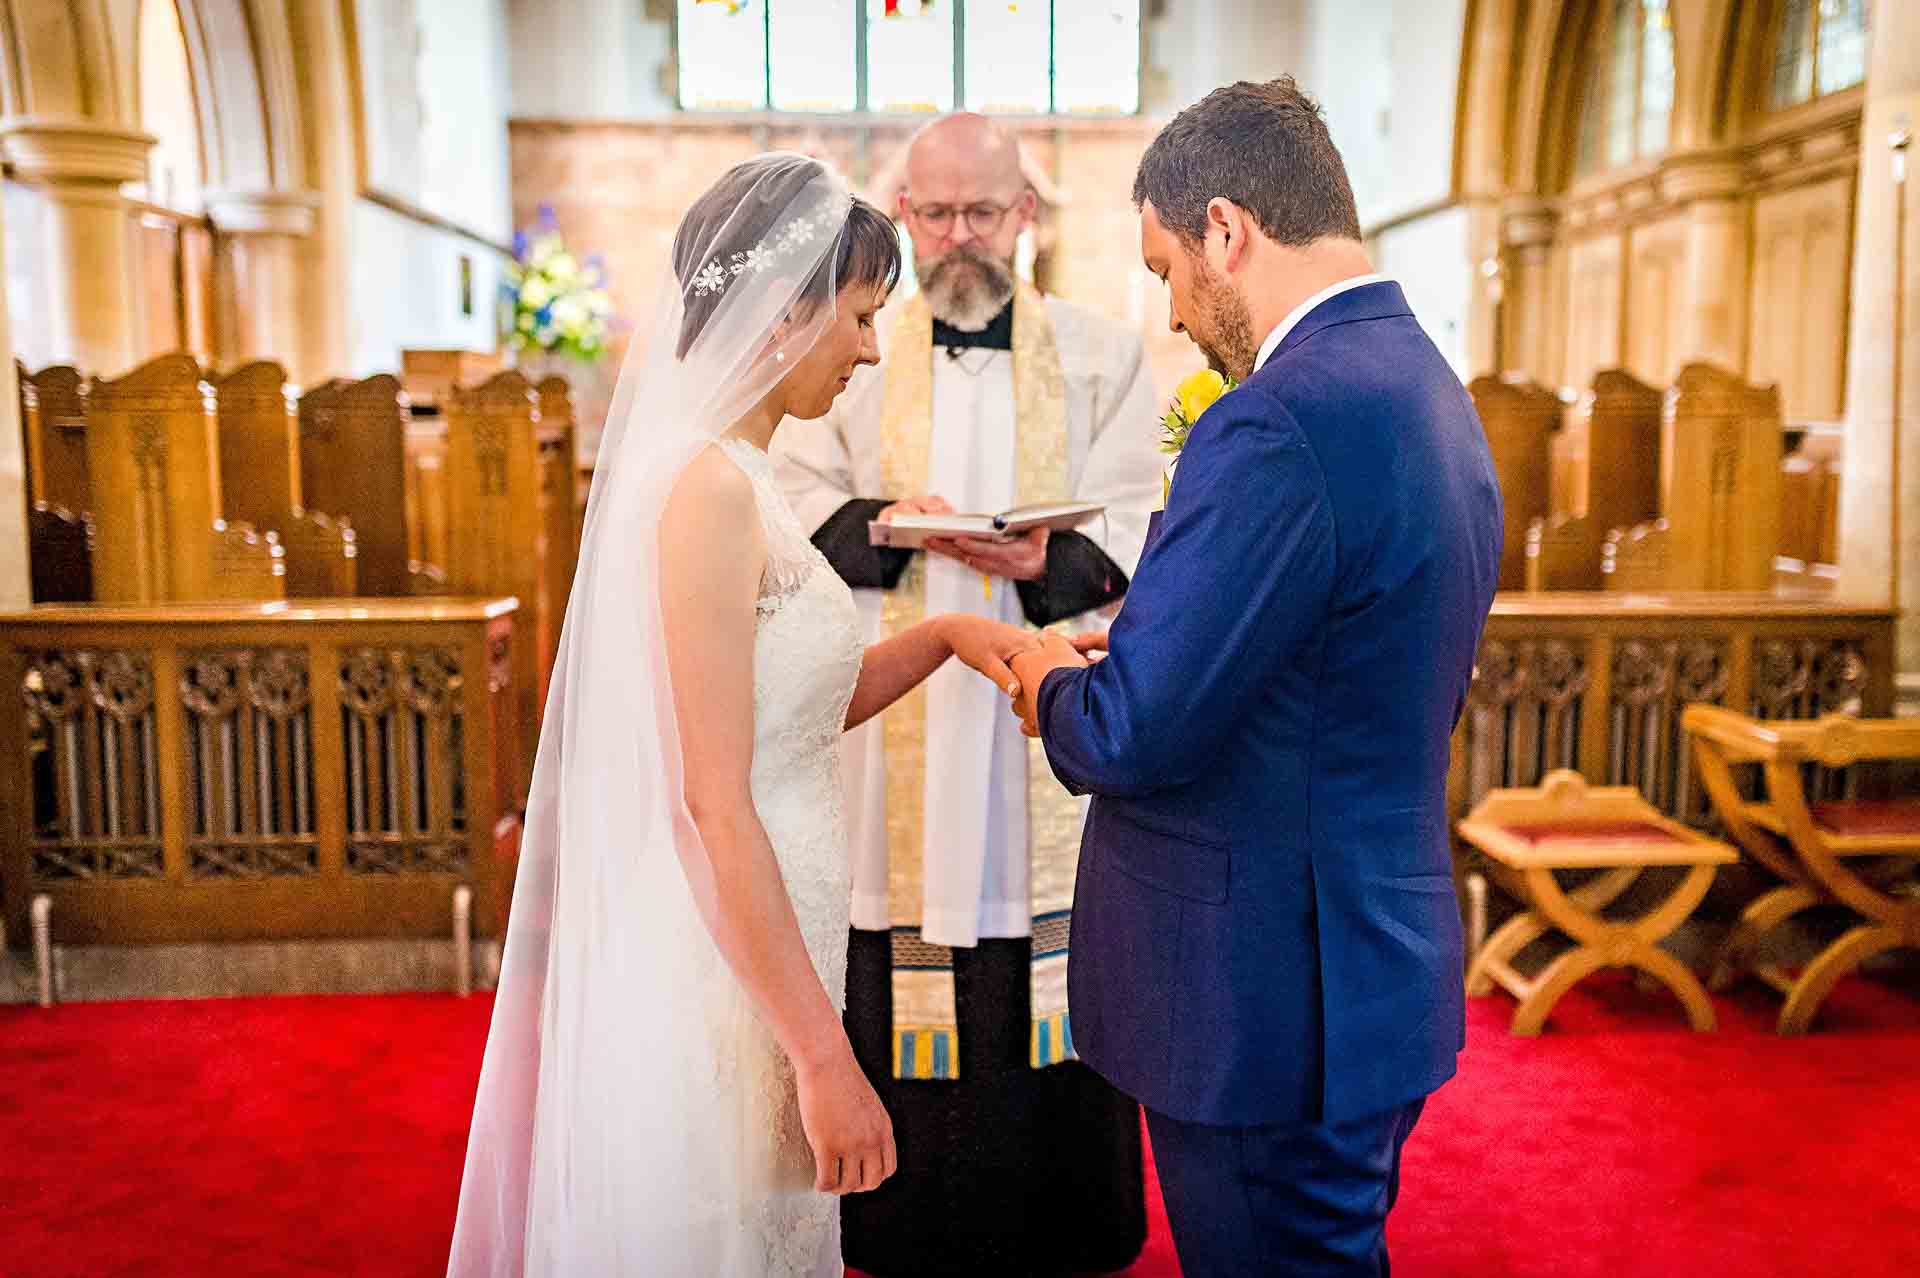 Exchange of Rings at St Martin's Church in Caerphilly